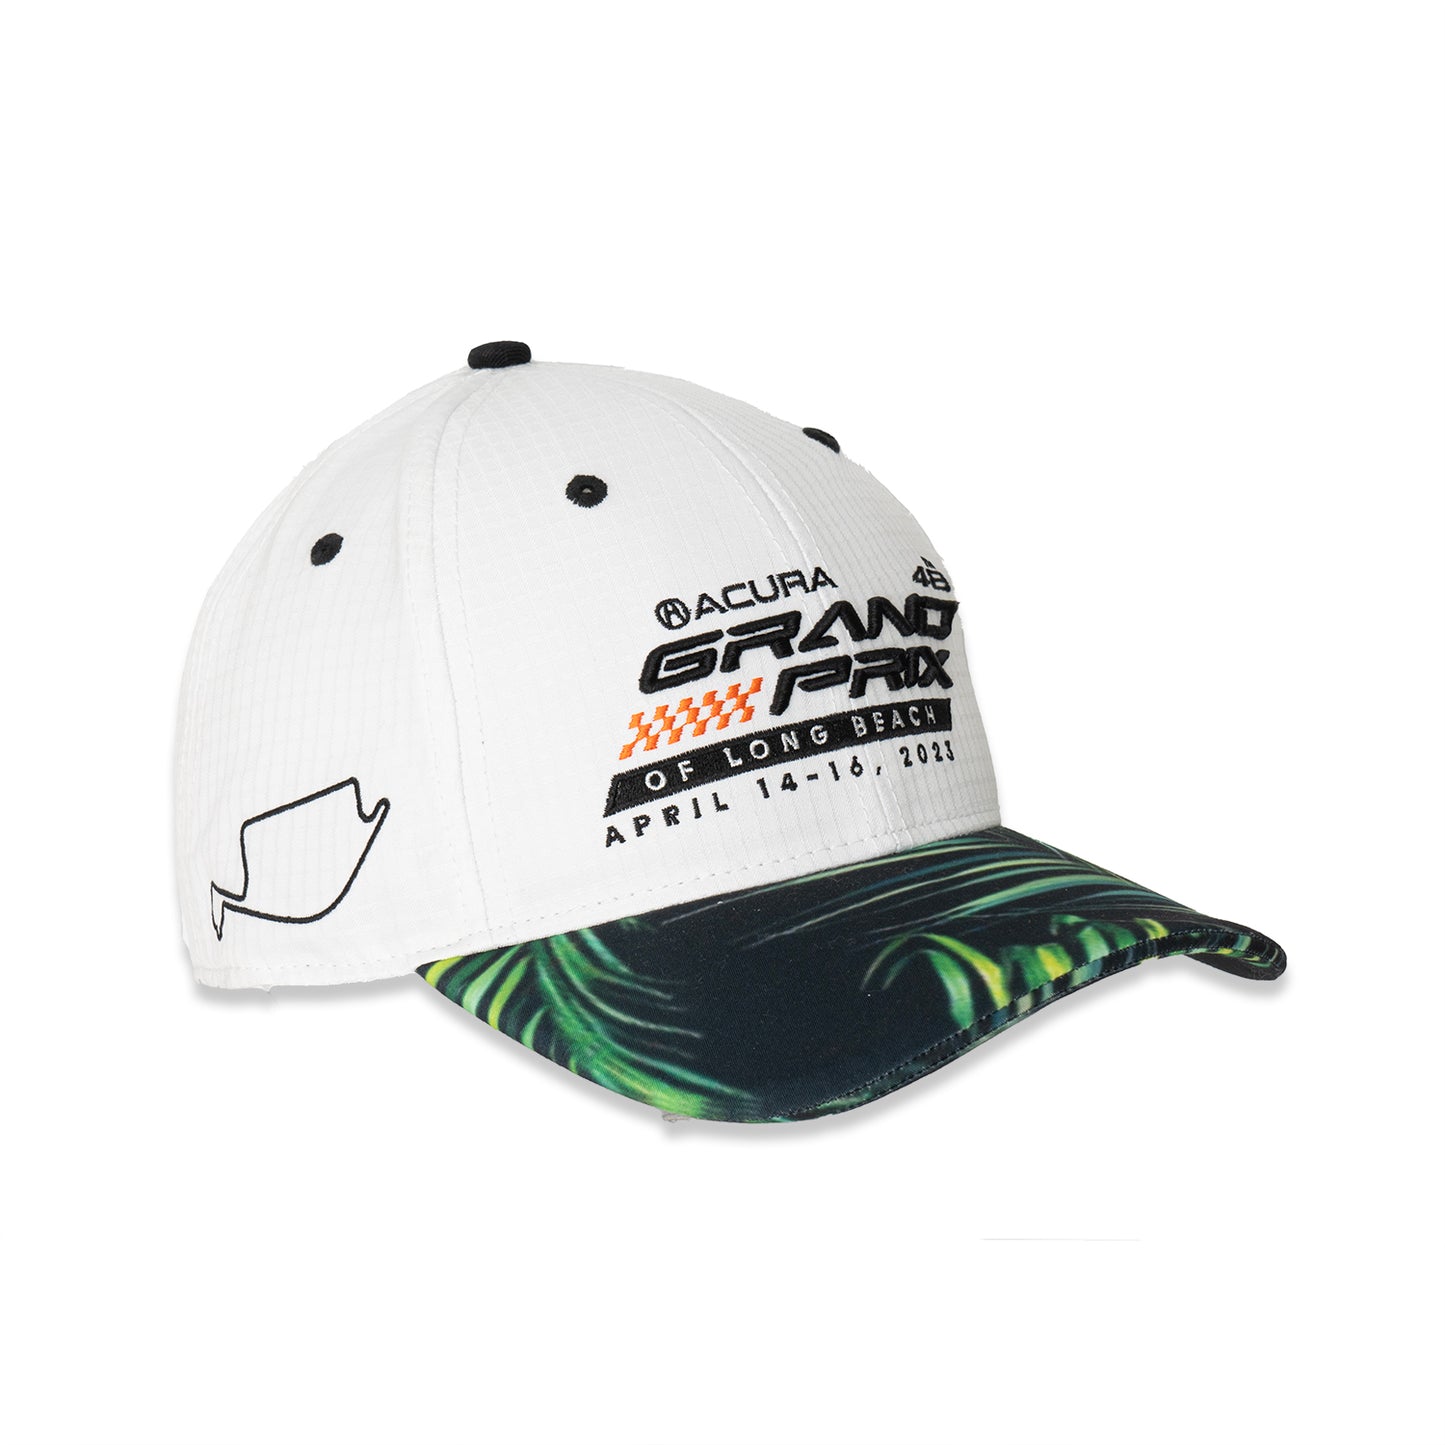 2023 Acura Grand Prix of Long Beach Floral Hat